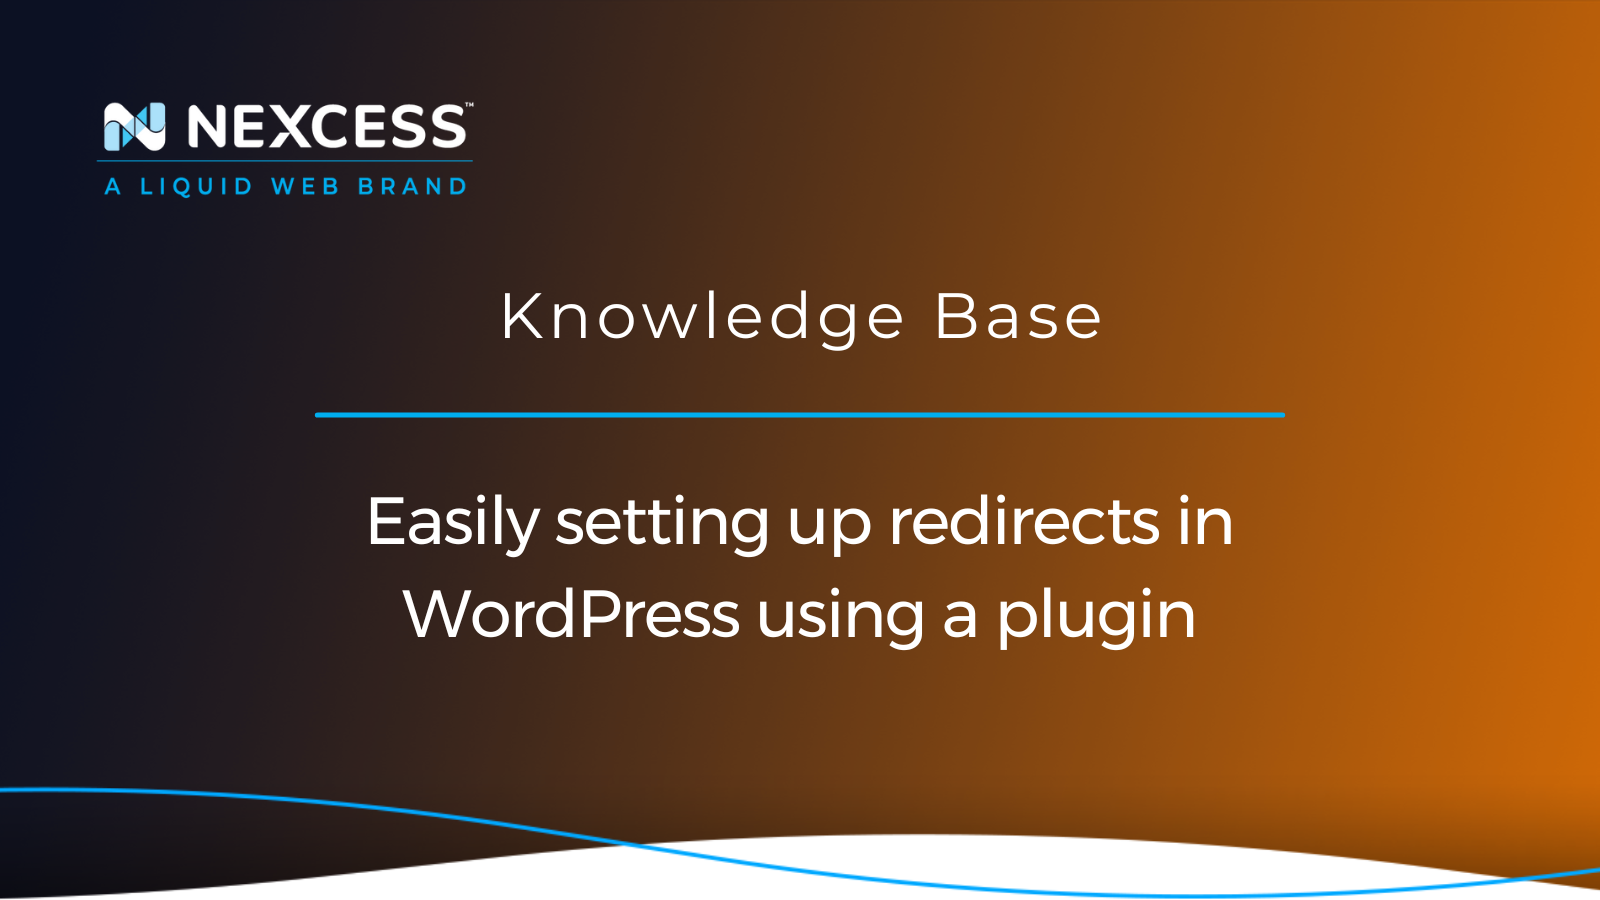 Easily setting up redirects in WordPress using a plugin